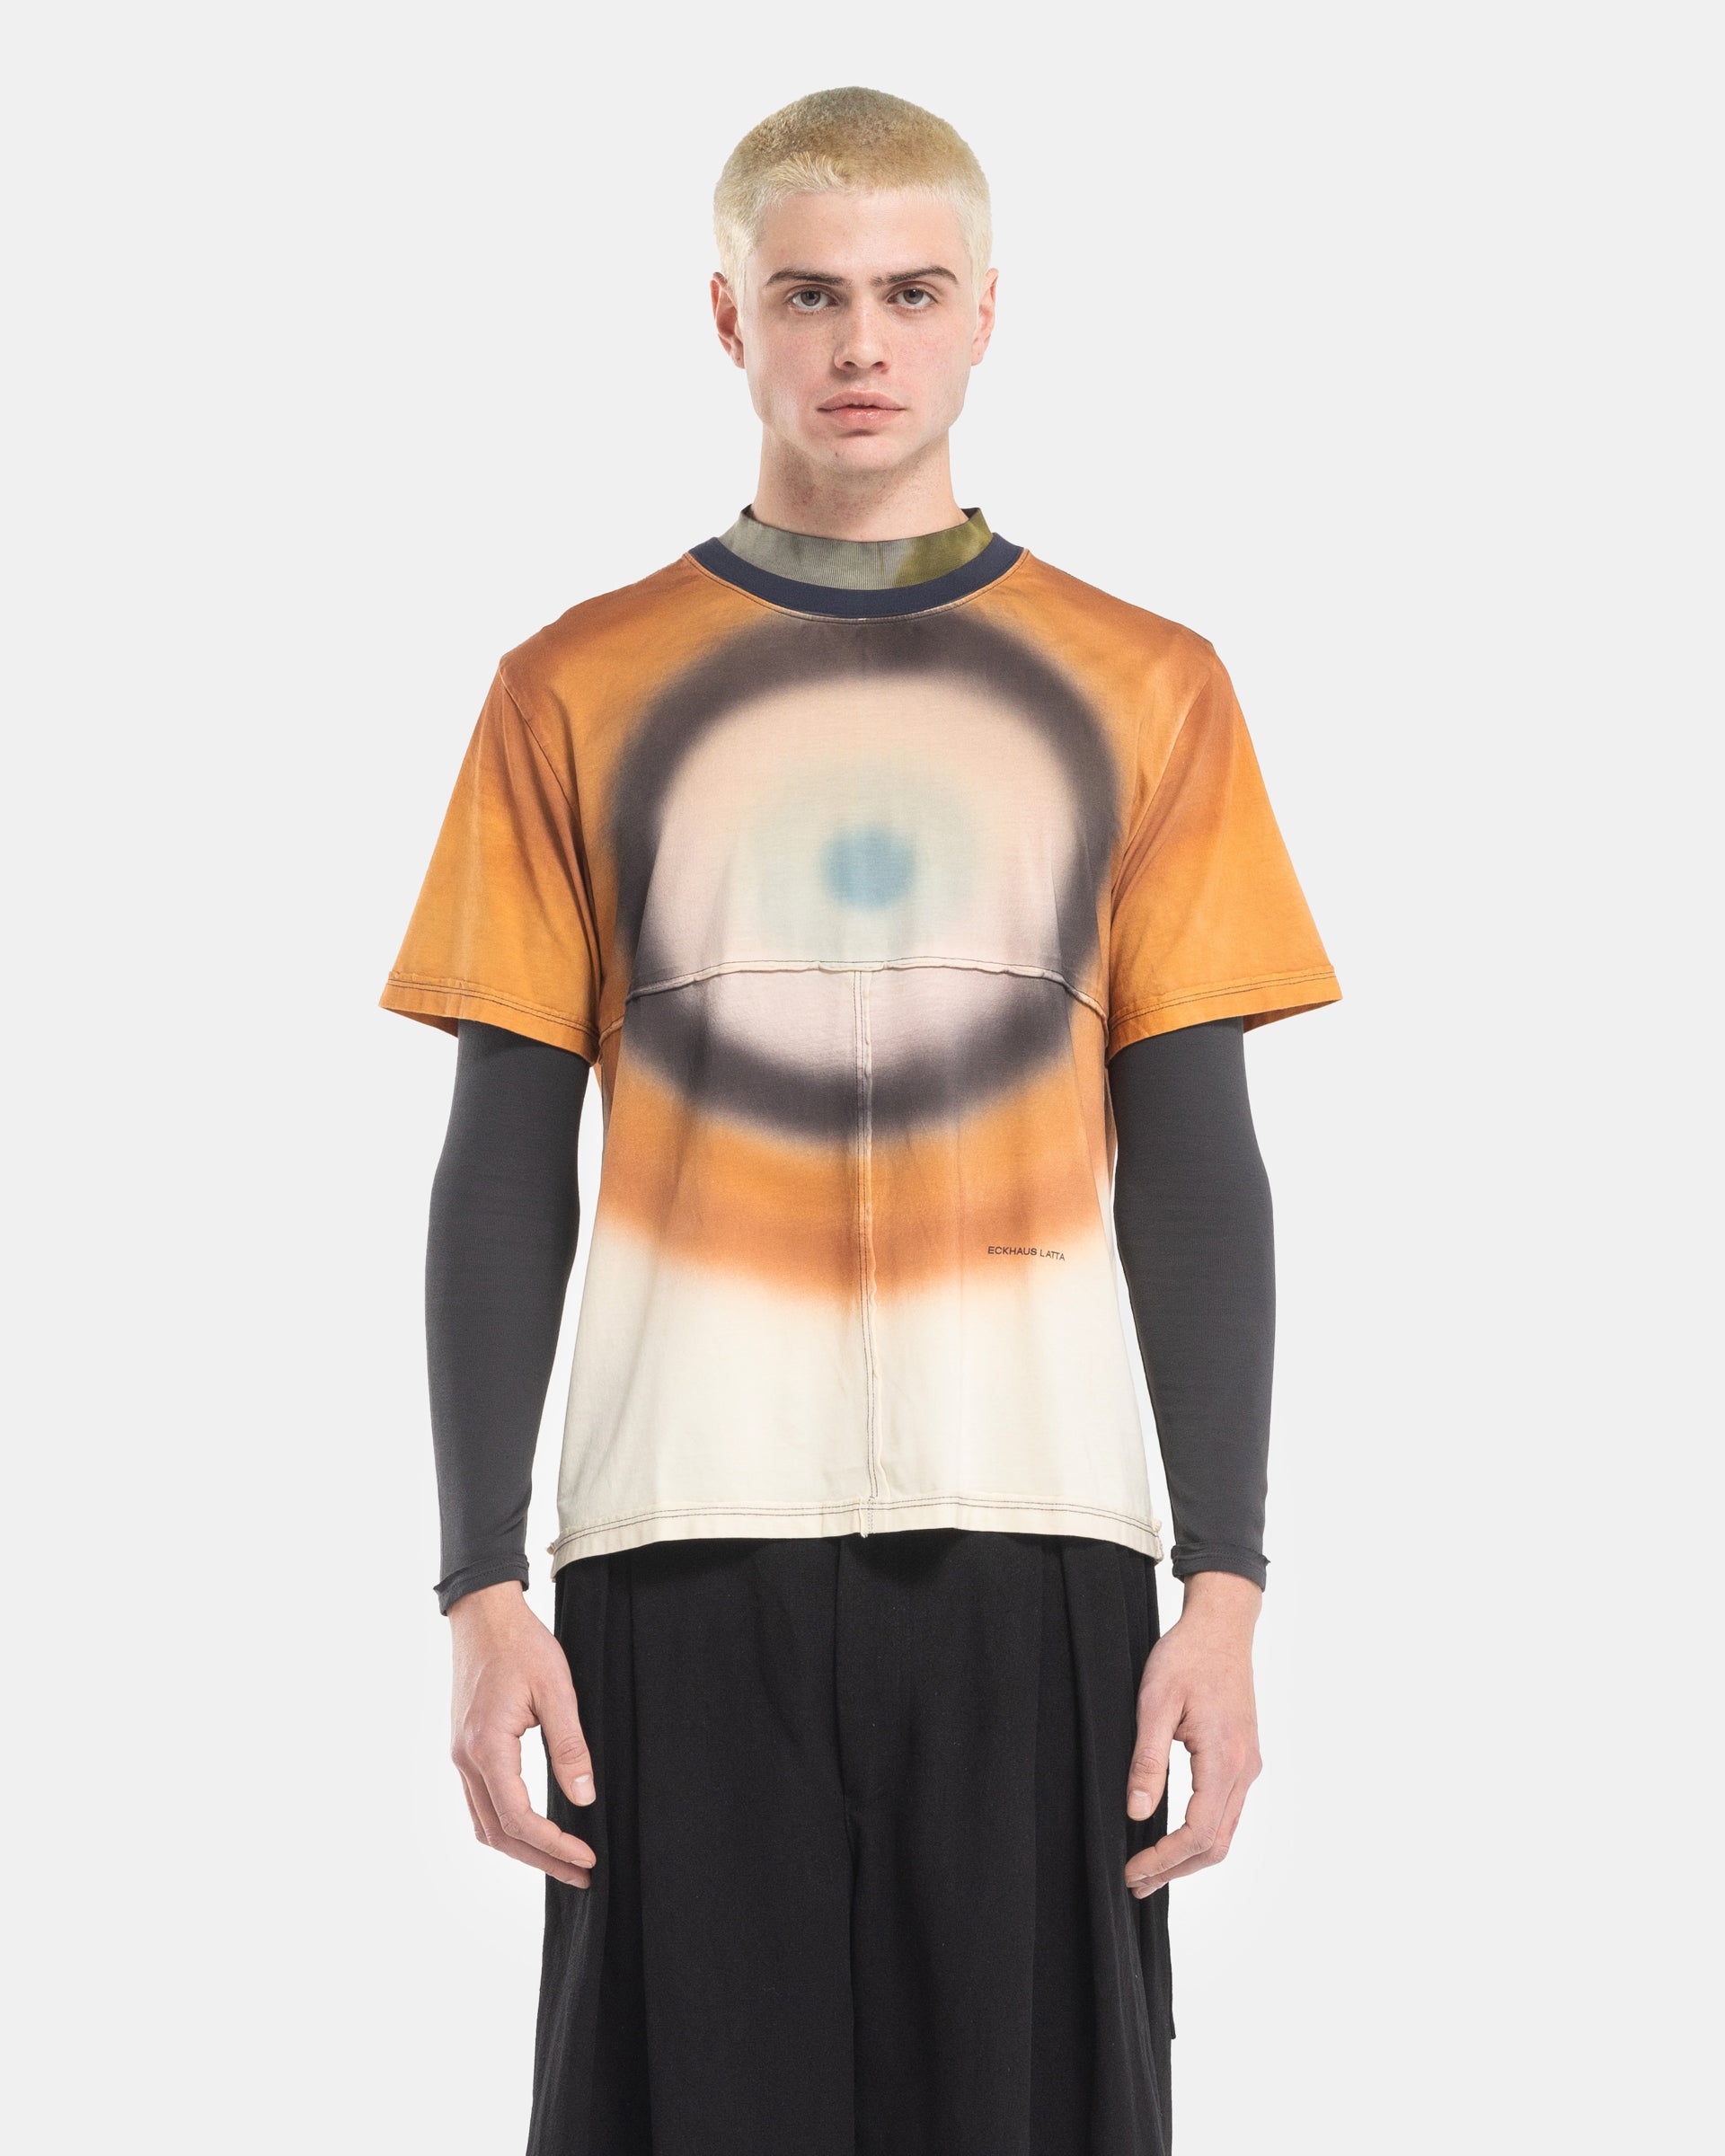 Male Model wearing the Eckhaus Latta Lapped Designer T-Shirt with a printed design